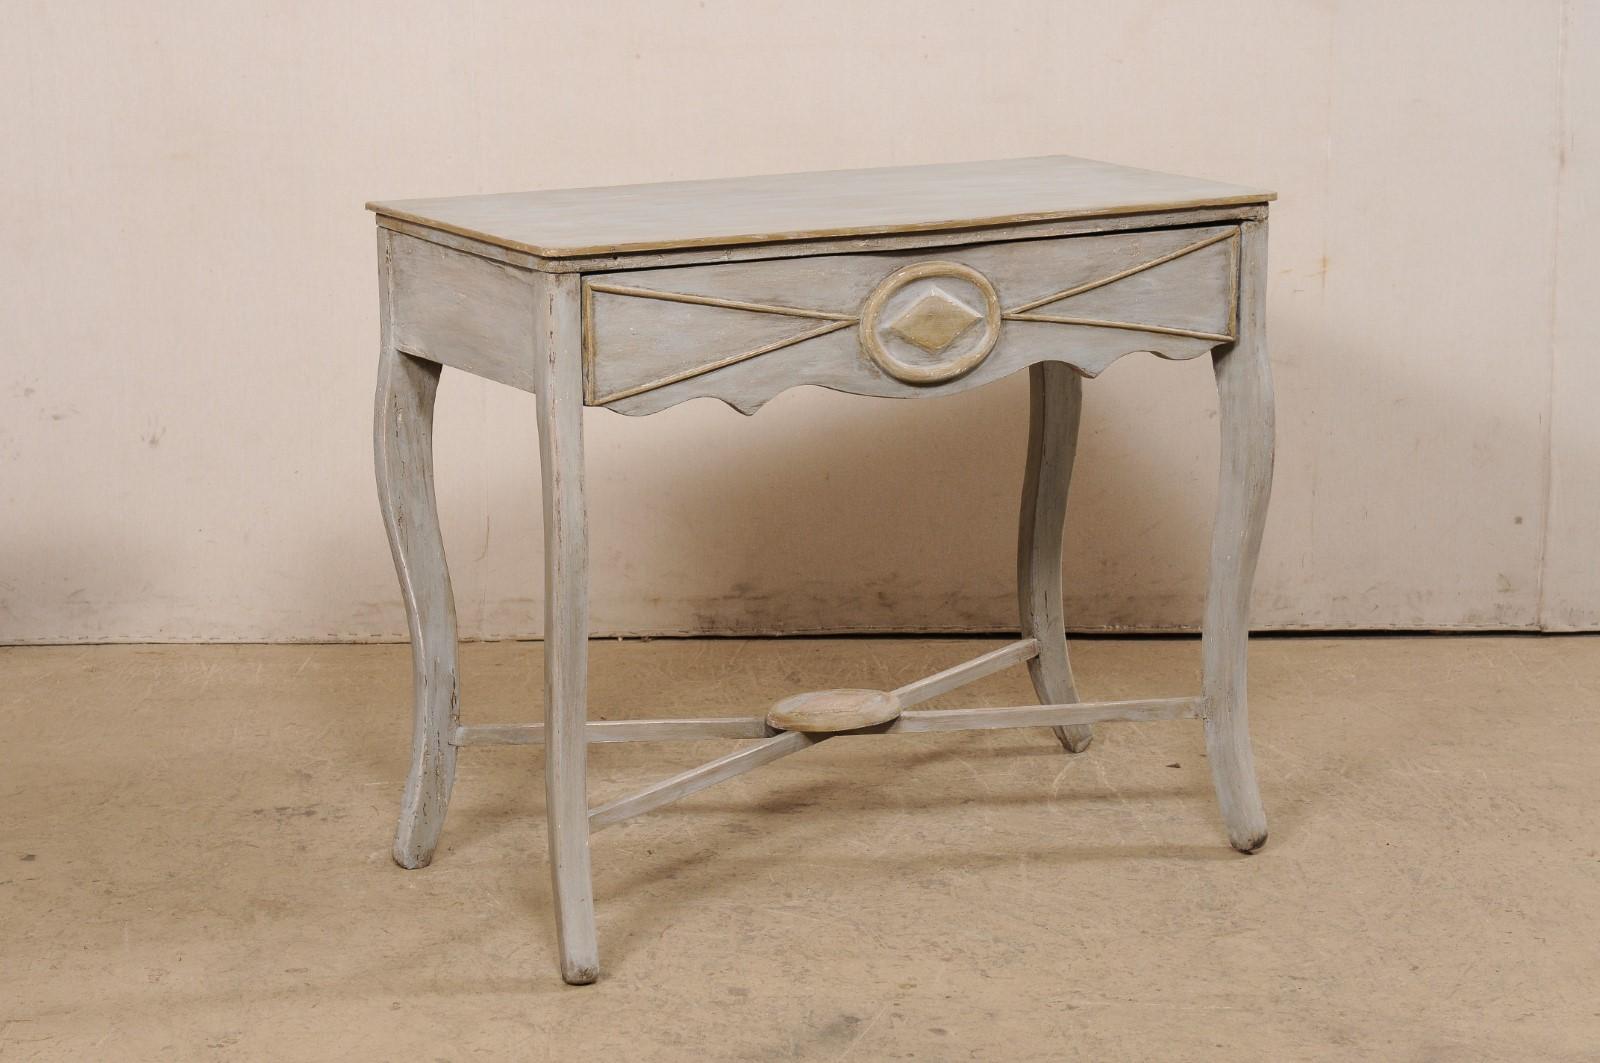 An Italian carved and painted wood console table from the 19th century. This antique table from Italy features a rectangular-shaped top (with a very subtle serpentine style front), with apron that houses a drawer along its front side, and presented